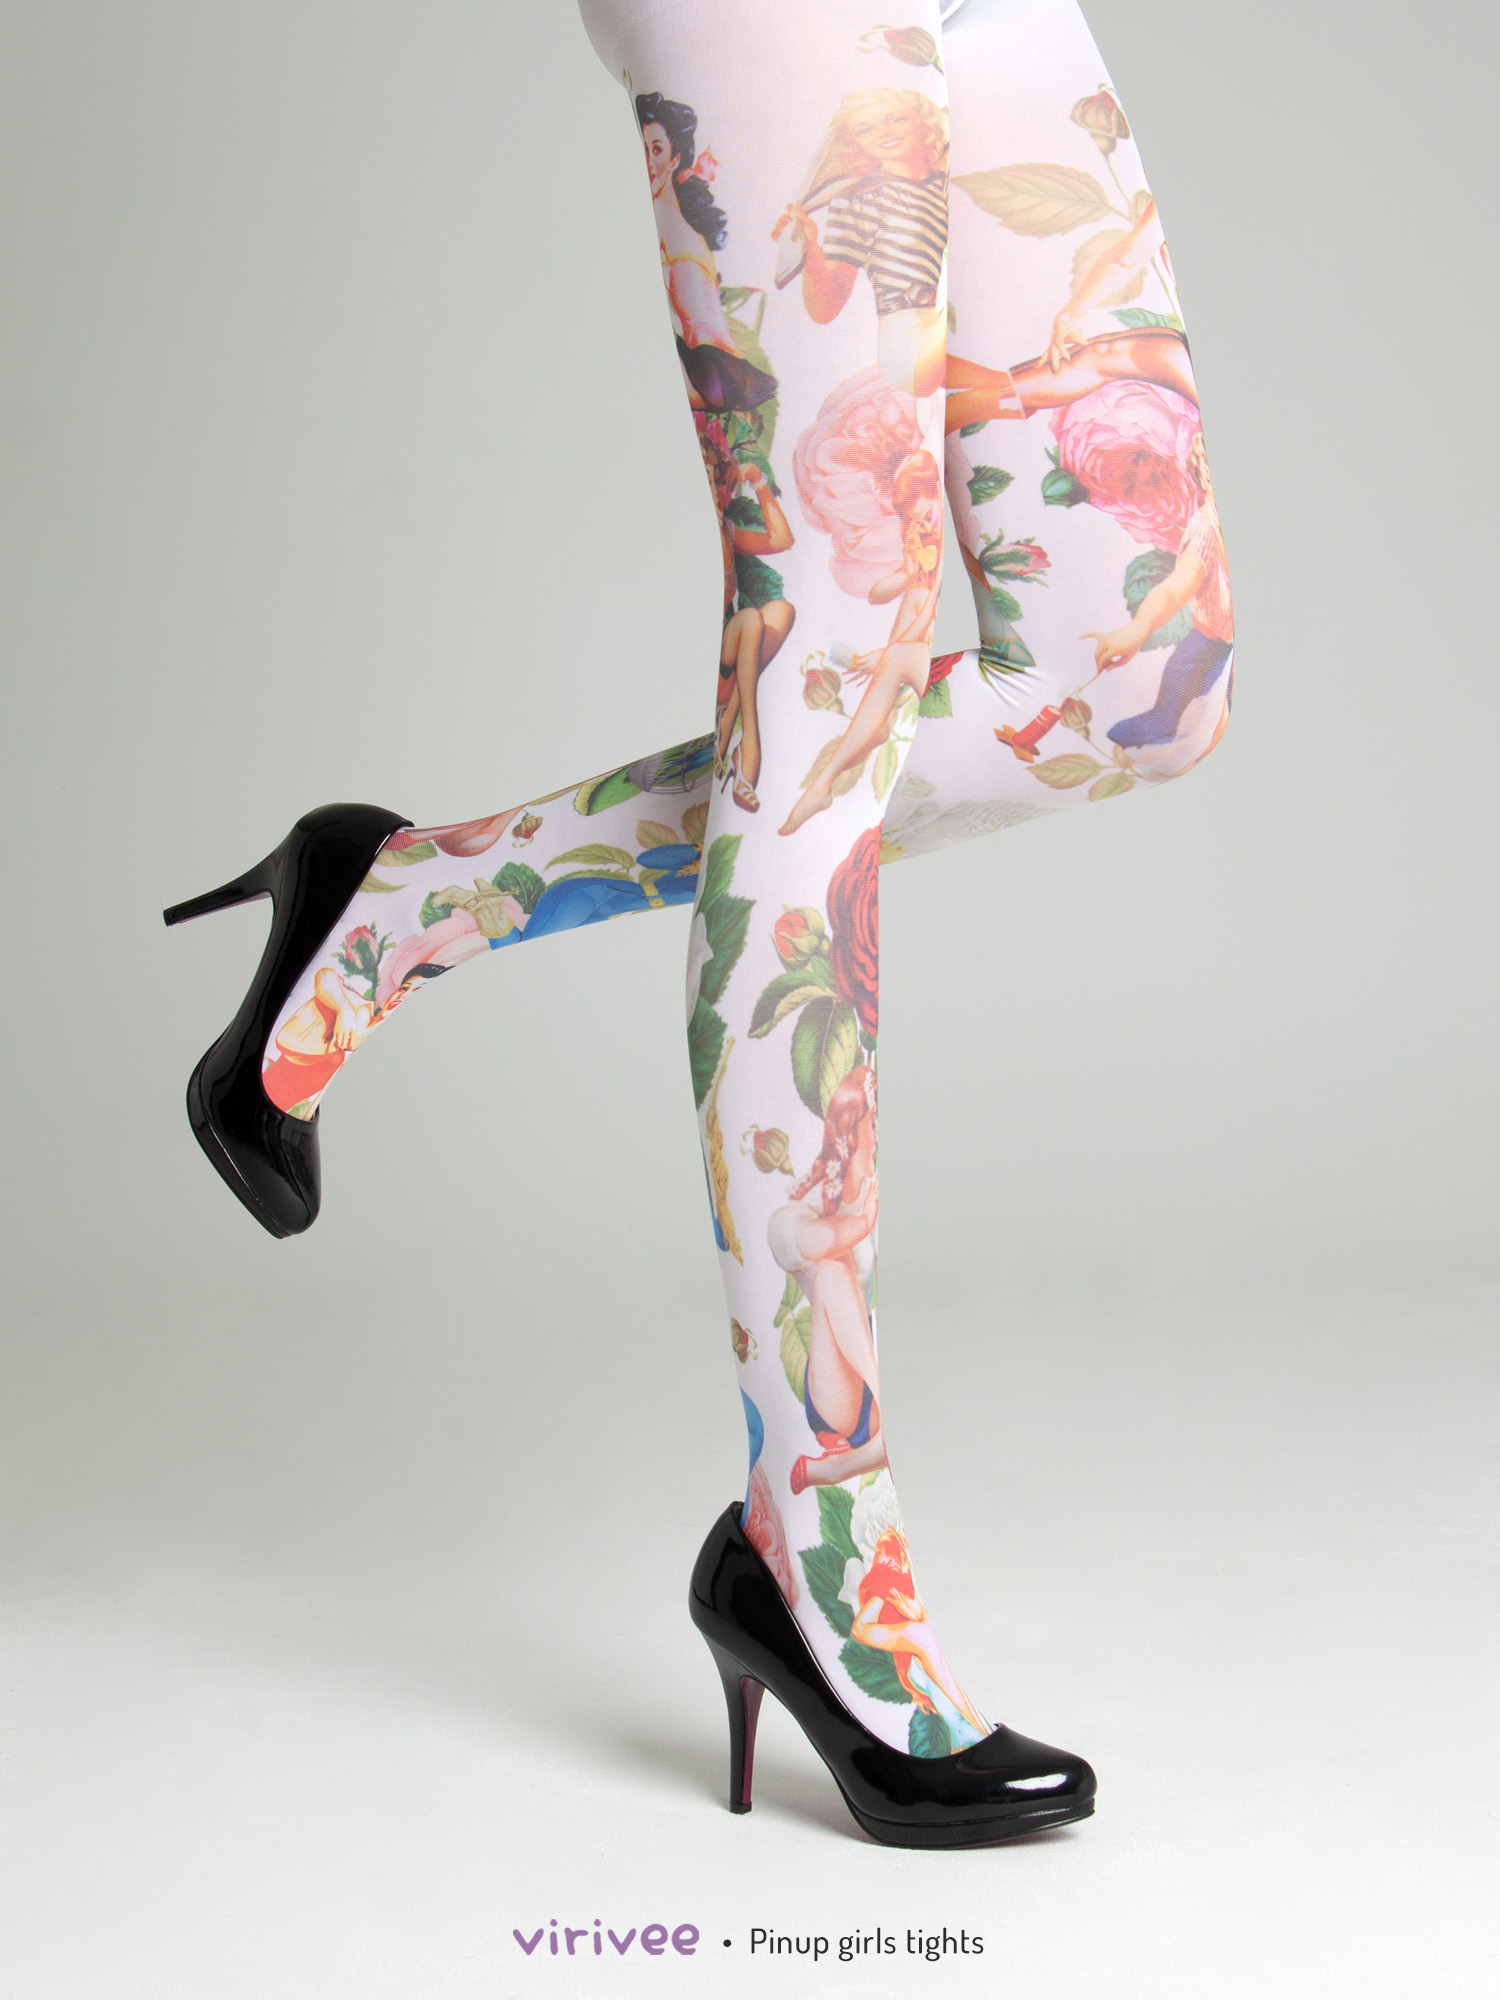 Pinup girls tights in S-4XL sizes